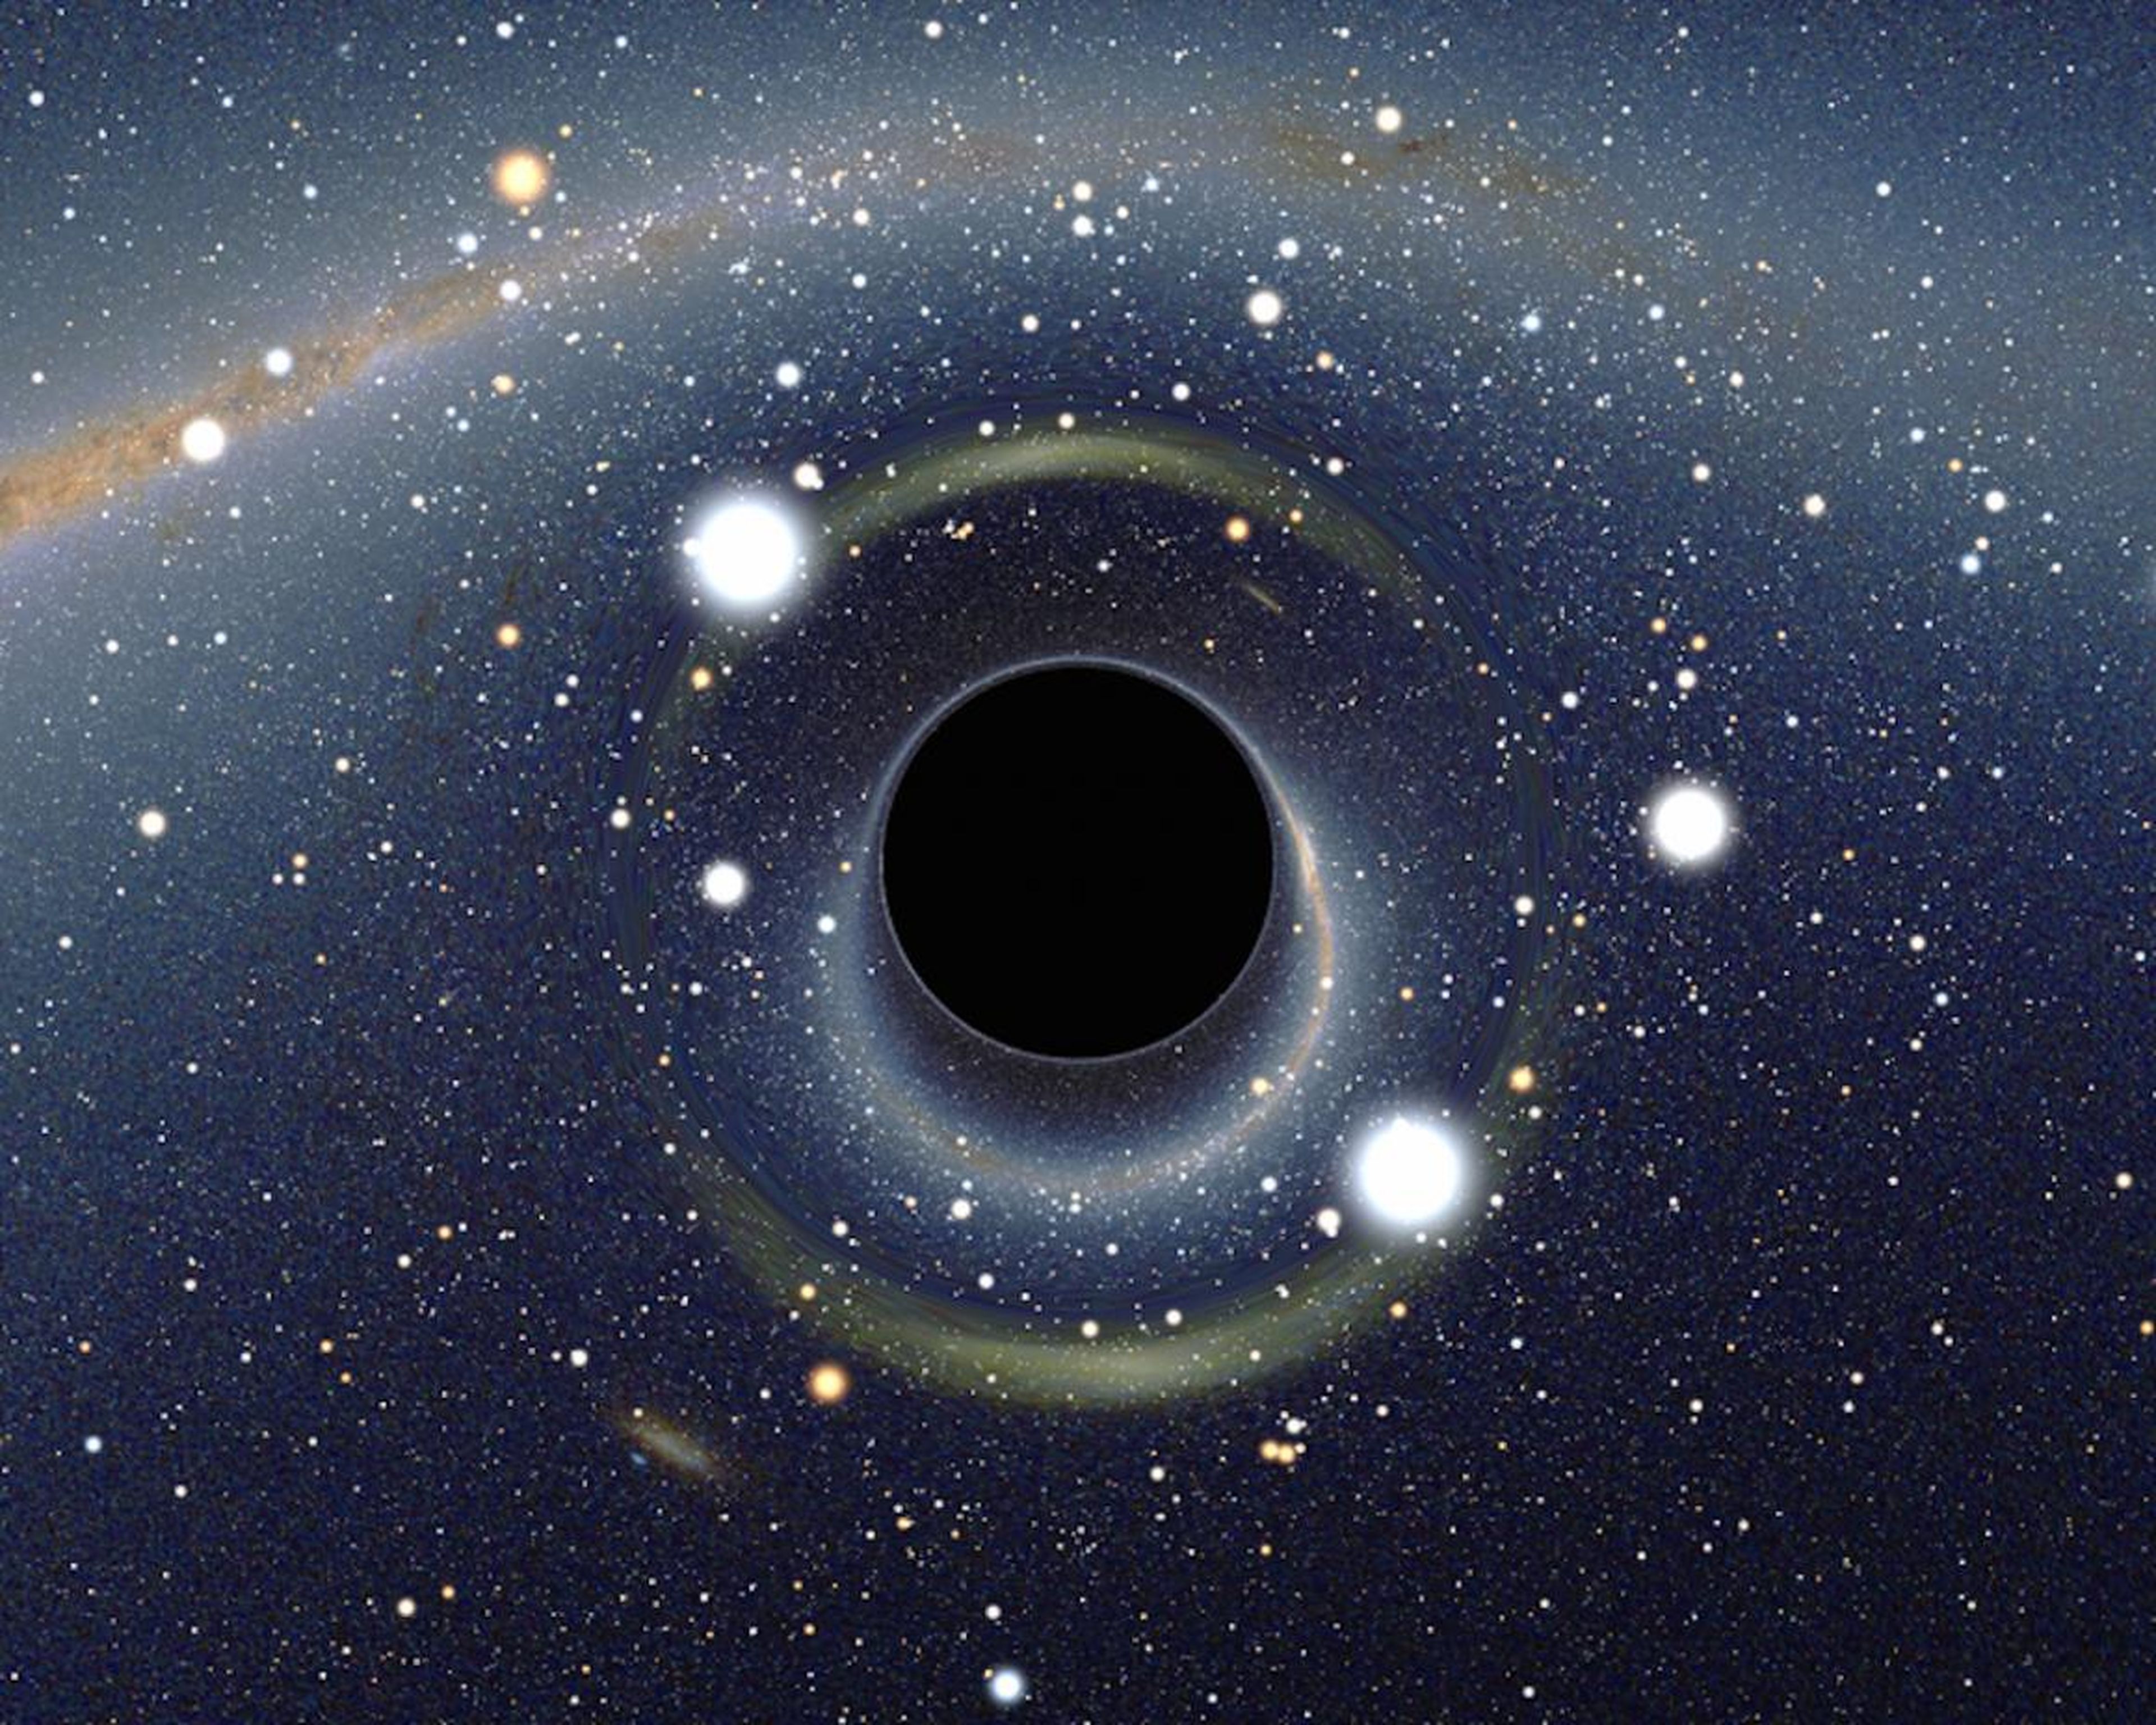 A black hole rendering shows a crescent, not a ring, of light.